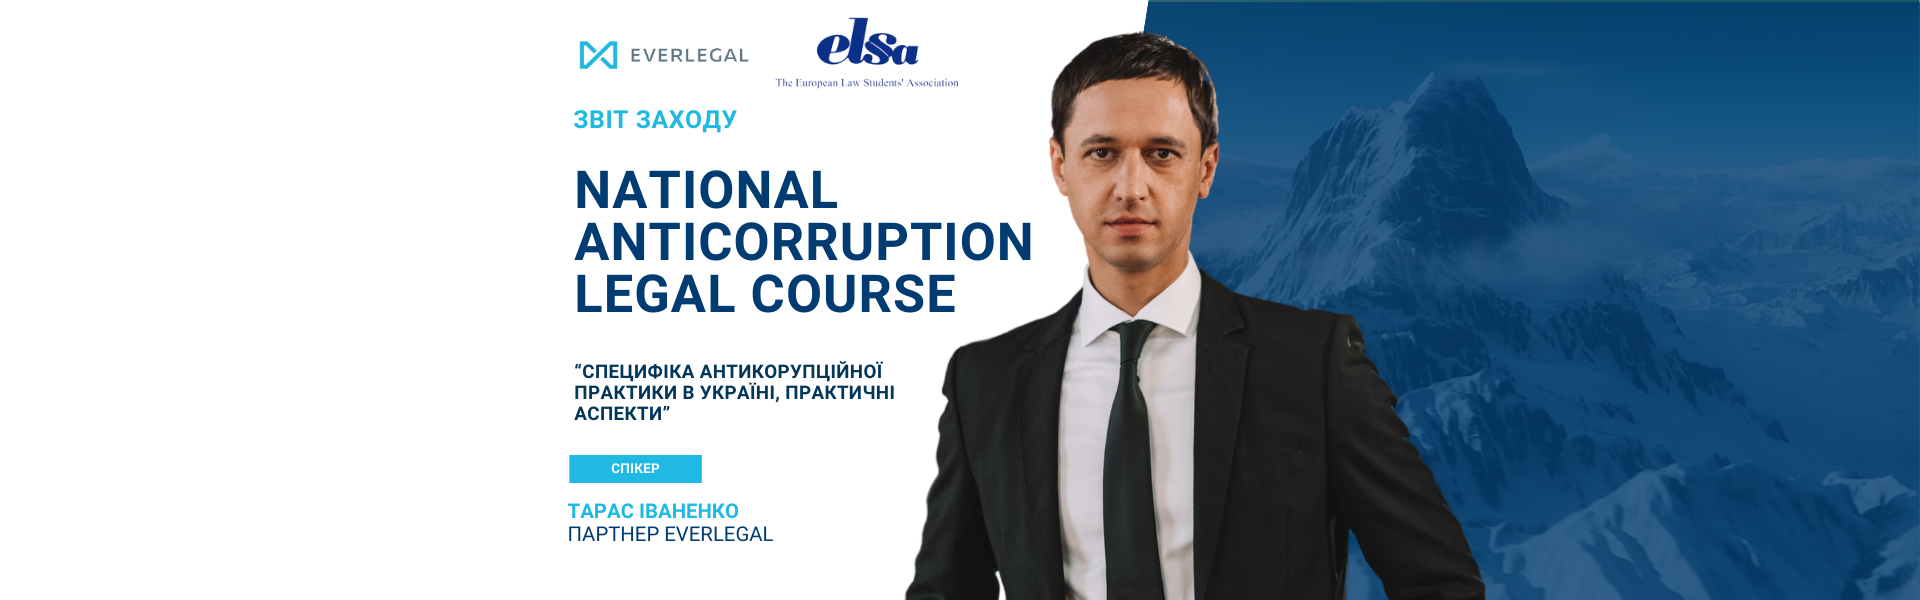 EVERLEGAL Partner was a speaker at the National Anticorruption Legal Course